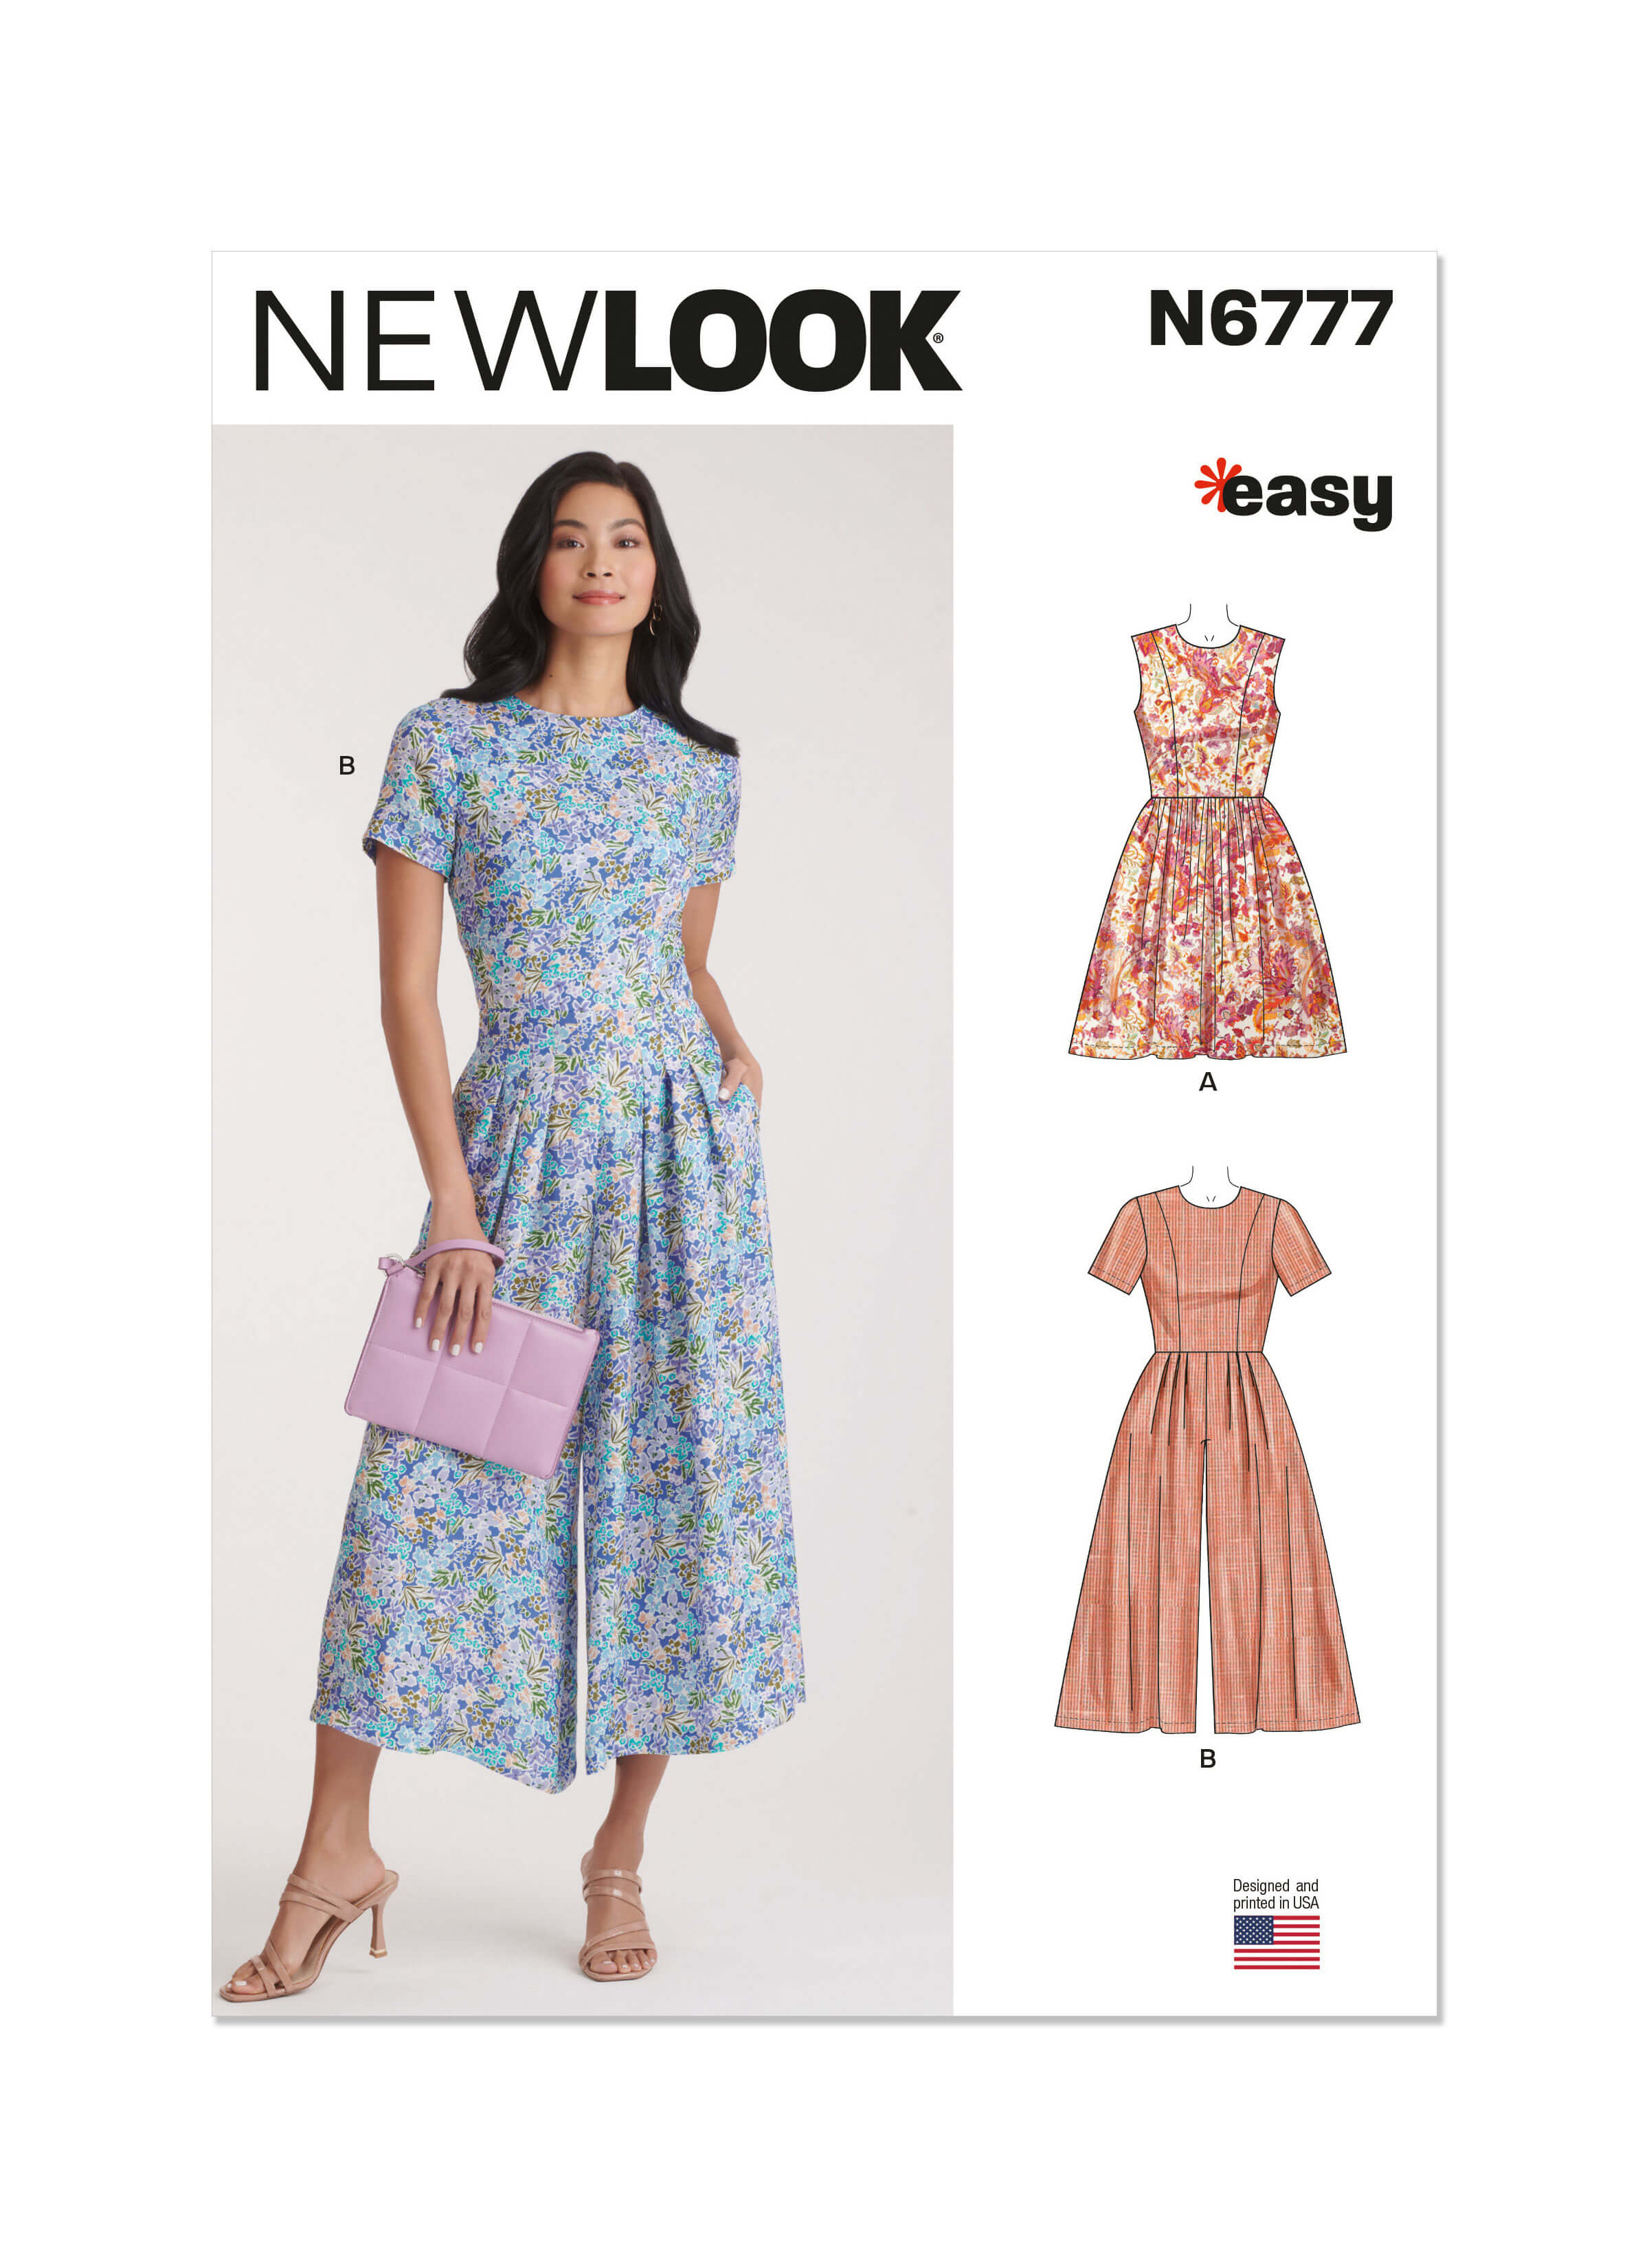 New Look Sewing Pattern N6777 Misses' Dress and Jumpsuit